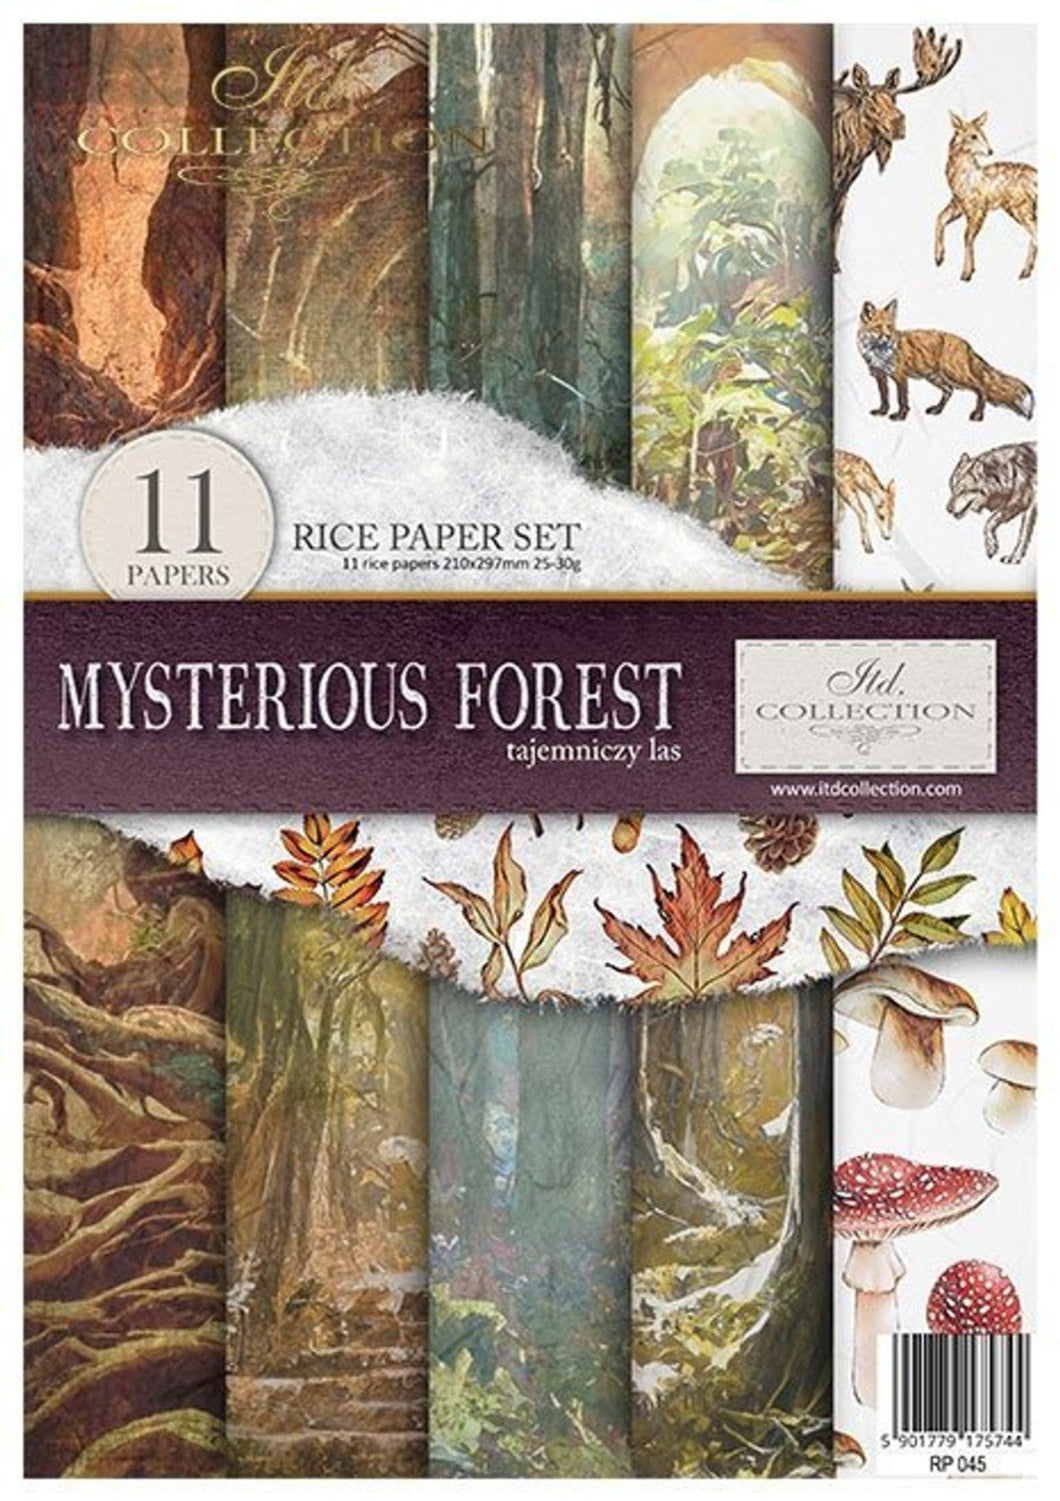 Mysterious Forest Rice Paper Set by ITD Collection, RP045, Pack of 11 Cover